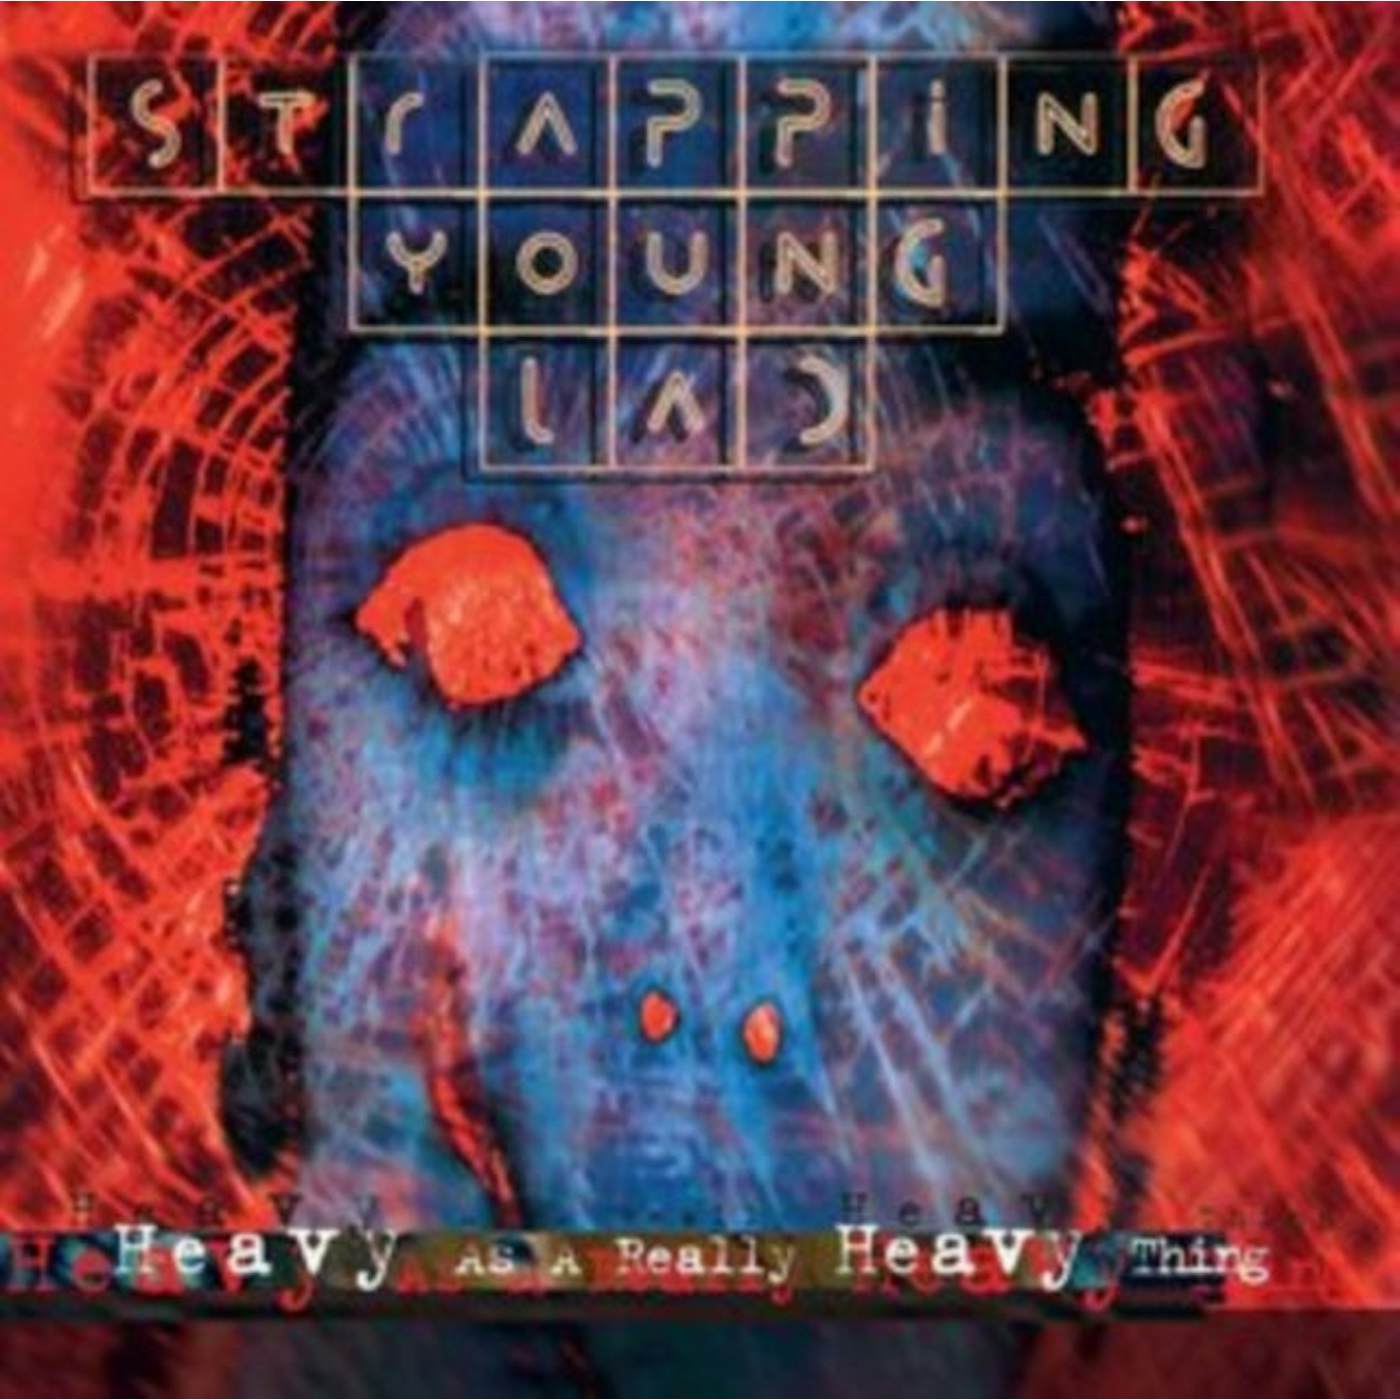 Strapping Young Lad LP - Heavy As A Really Heavy Thing (Vinyl)